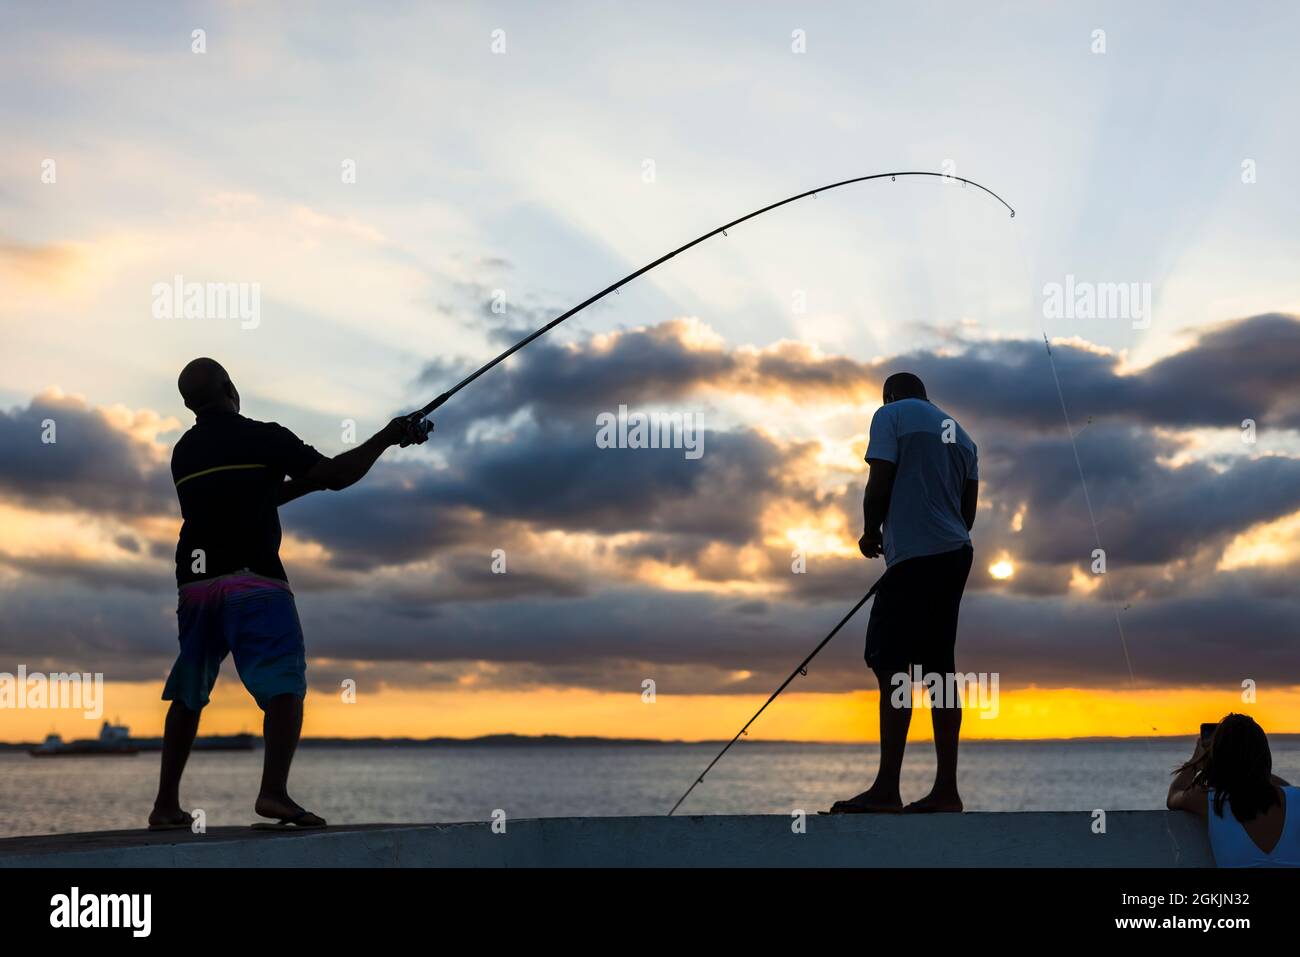 Salvador, Bahia, Brazil - May 23, 2021: Silhouette of fishermen with their poles at sunset. Stock Photo